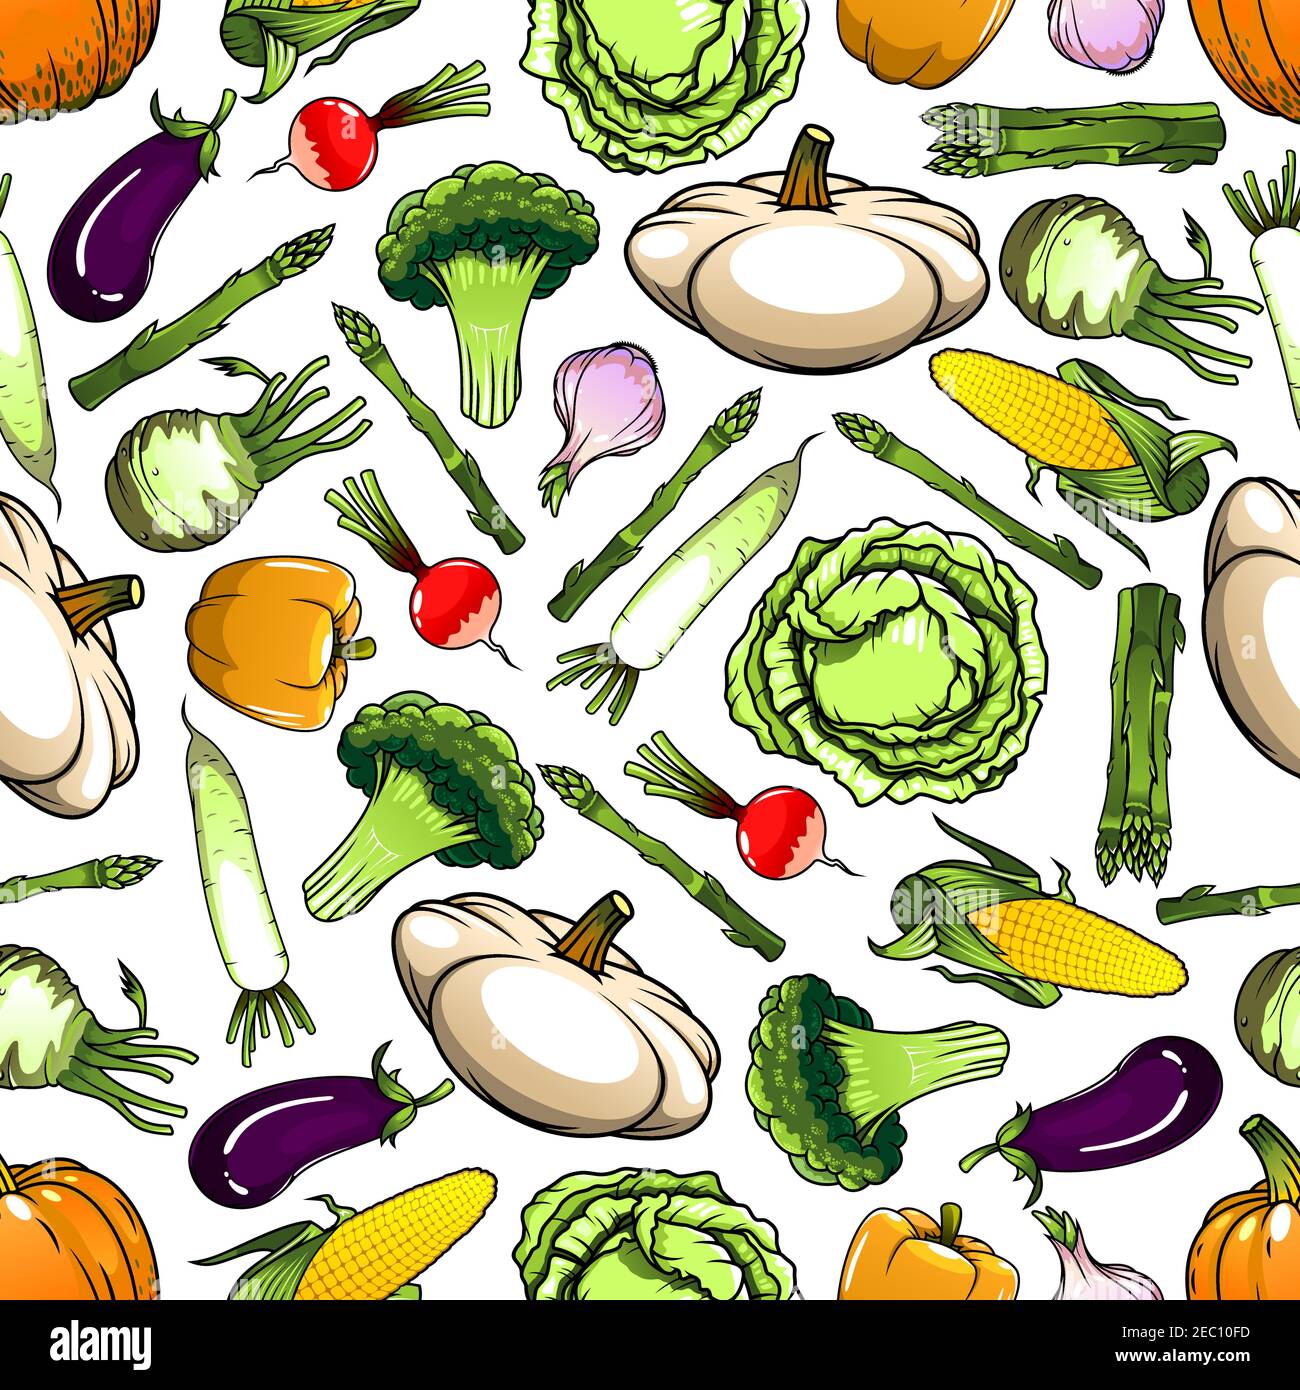 Seamless pattern of wholesome cabbages and broccoli, corn cobs and eggplants, bell peppers and garlic, pumpkins and kohlrabi, asparagus and radishes, Stock Vector